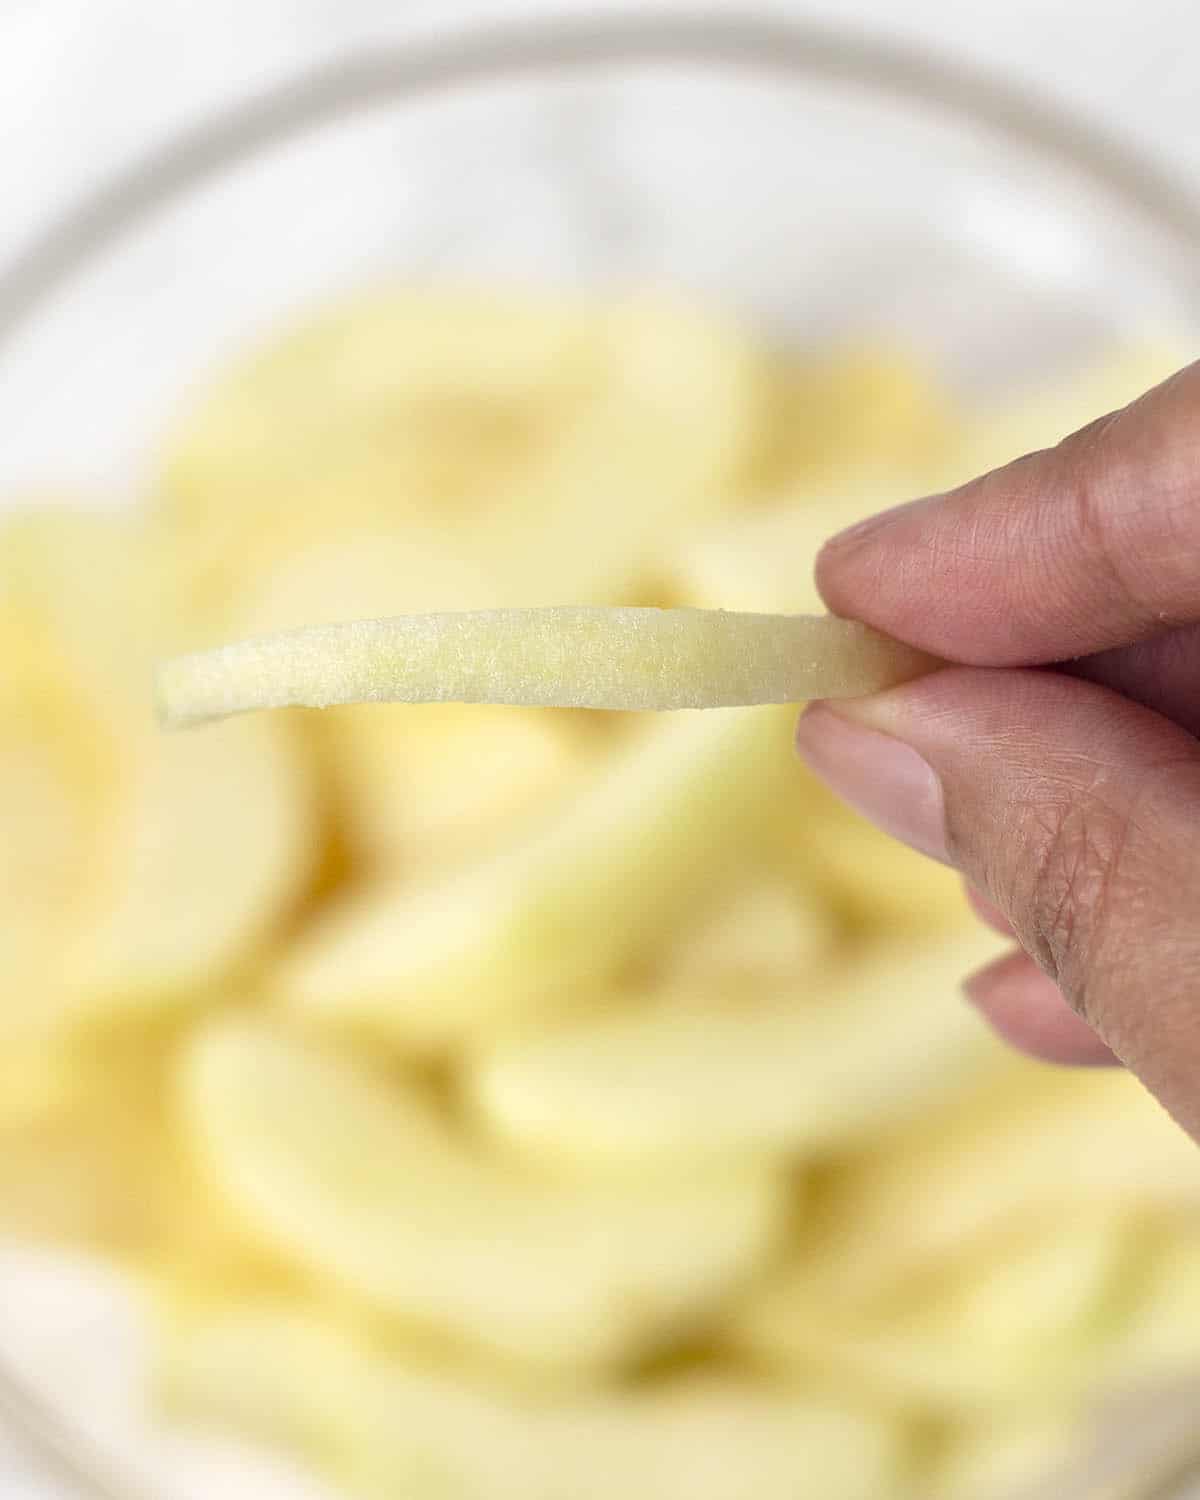 A close up shot of a hand holding a slice of apple to show how thick the apples should be sliced for this recipe.